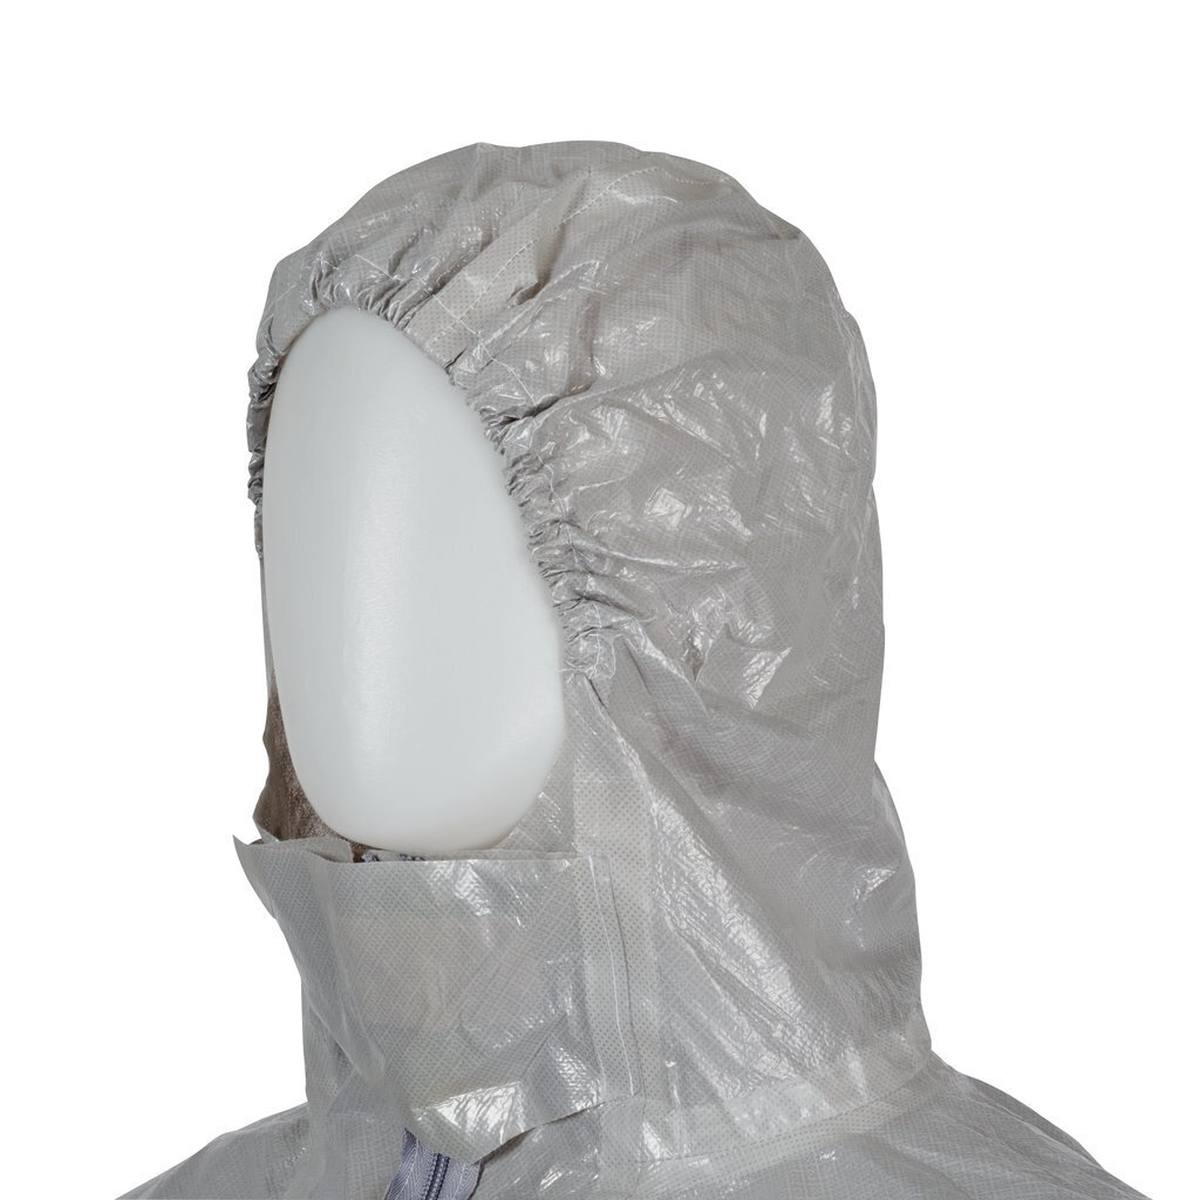 3M 4570 Protective suit, grey, type 3/4/5/6, size L, extremely robust, sealed seams, double zip, light and supple material, size L